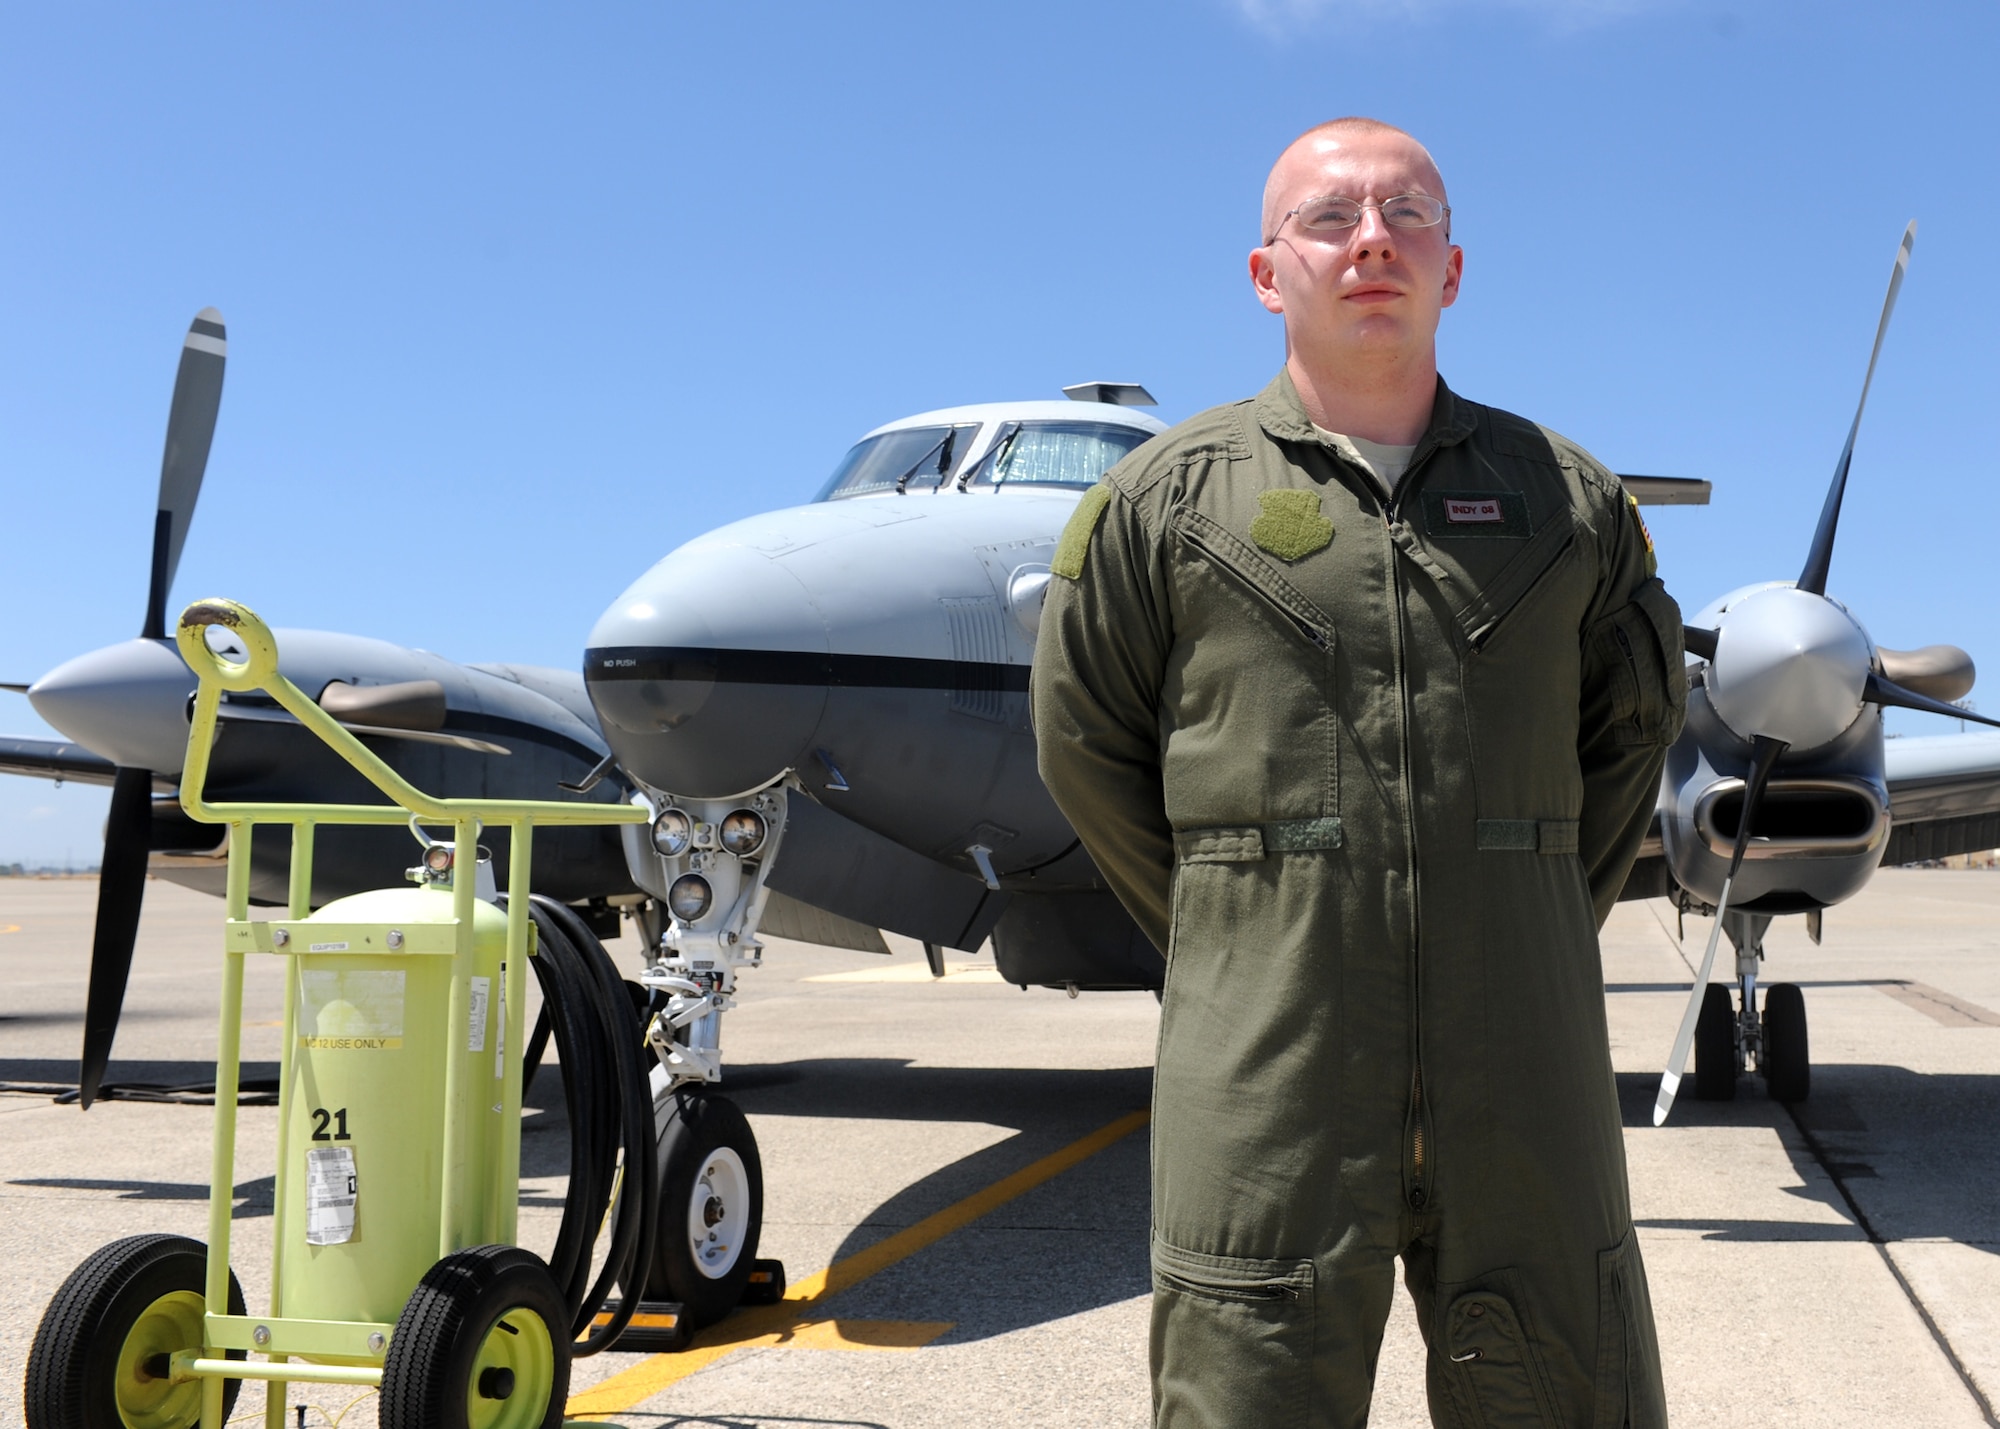 Senior Airman Tyler, 306th Intelligence Squadron, stands in front of a MC-12 Liberty aircraft at Beale Air Force Base Calif., June 12, 2013. Tyler was recently accepted into the Air Force Academy Prep School through the Leaders Encouraging Airmen Development (LEAD) program. (U.S. Air Force photo by Airman 1st Class Bobby Cummings)